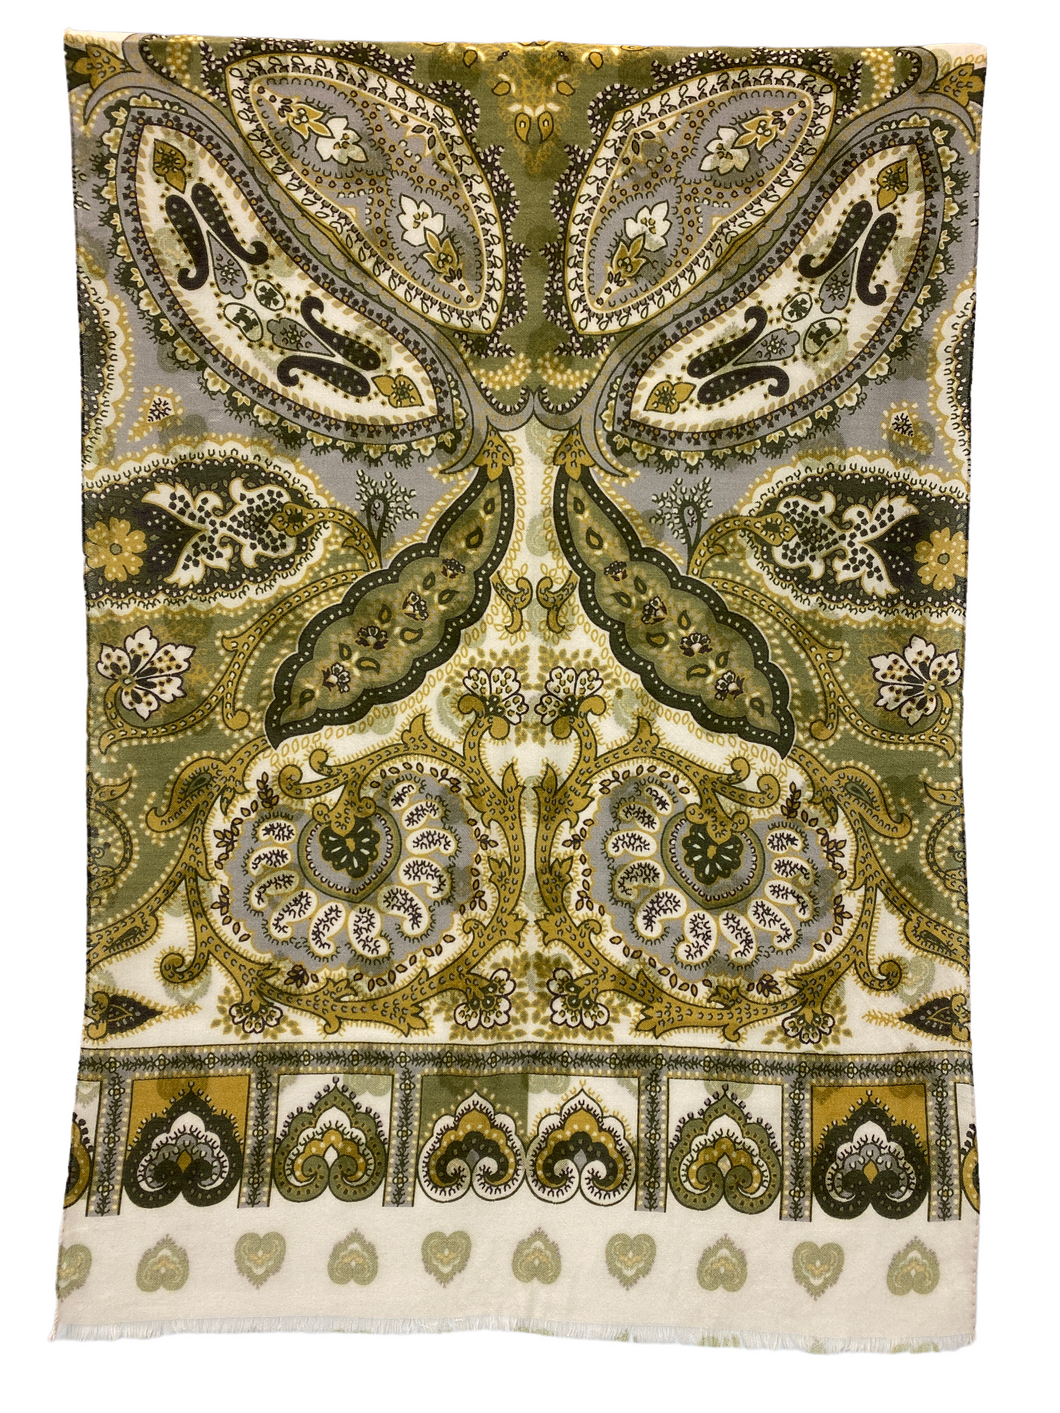 Calabrese Lambswool Scarf Paisley Hearts Olive/Mustard